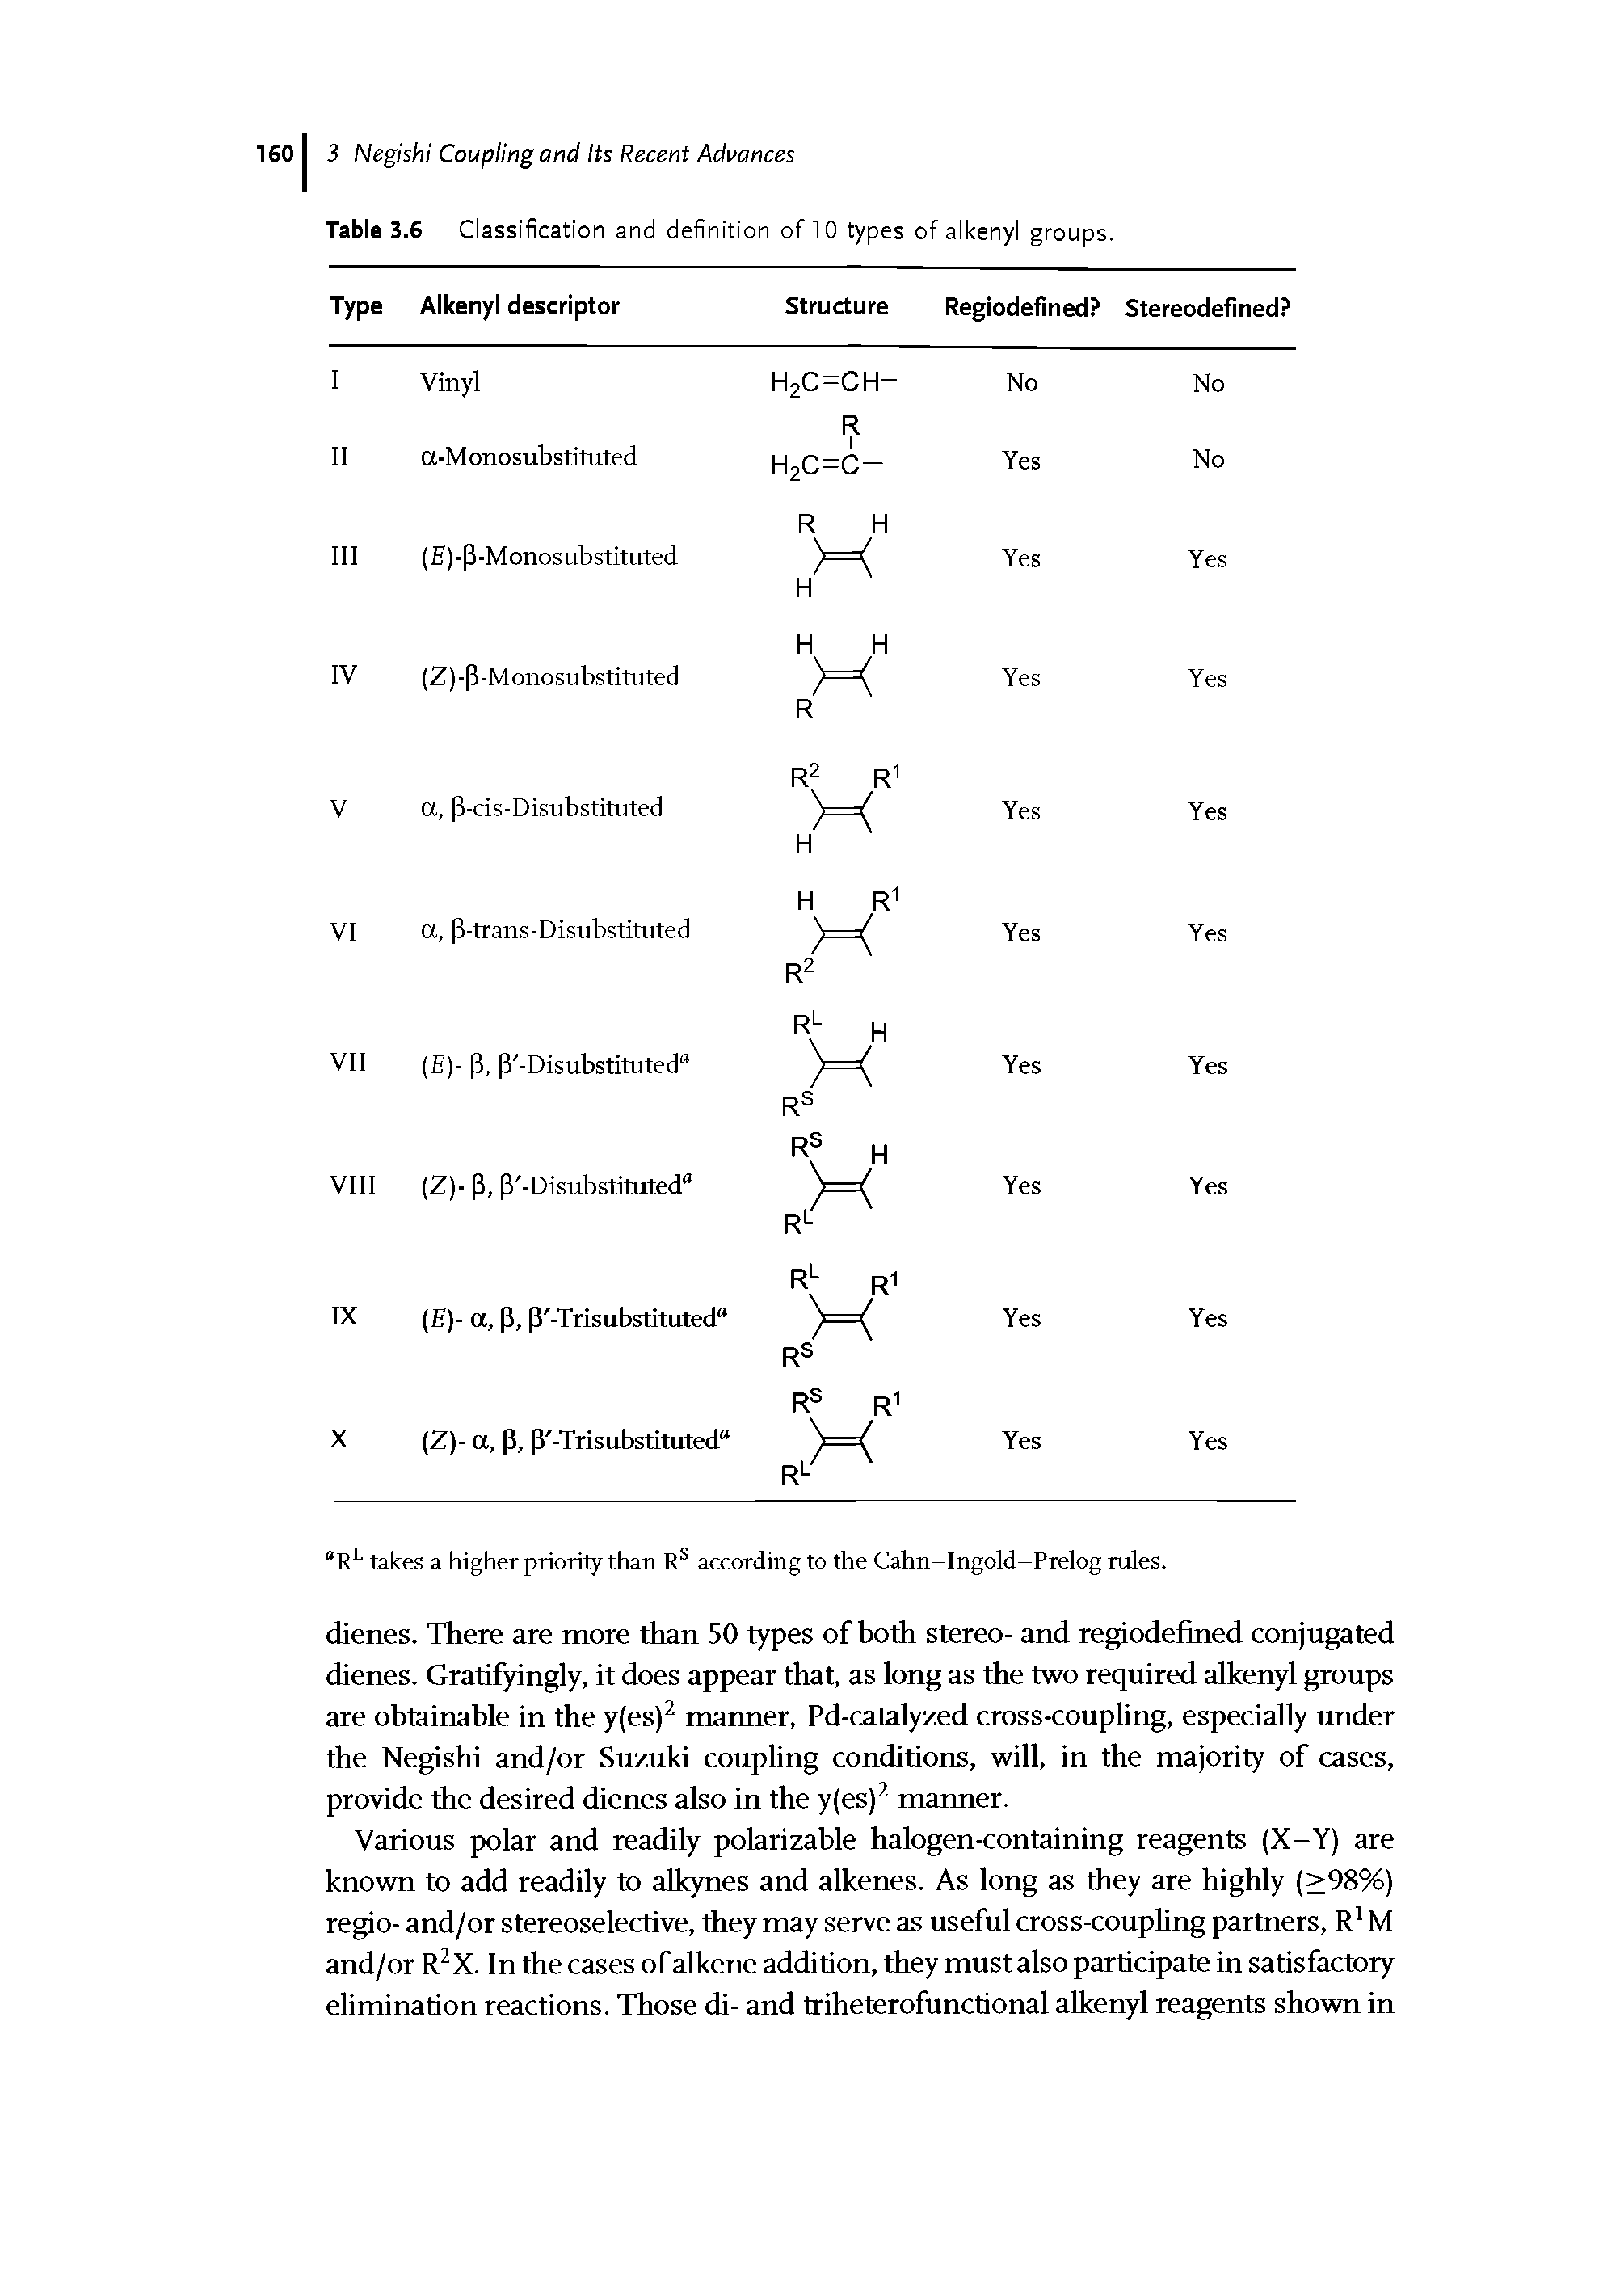 Table 3.6 Classification and definition of 10 types of alkenyl groups.